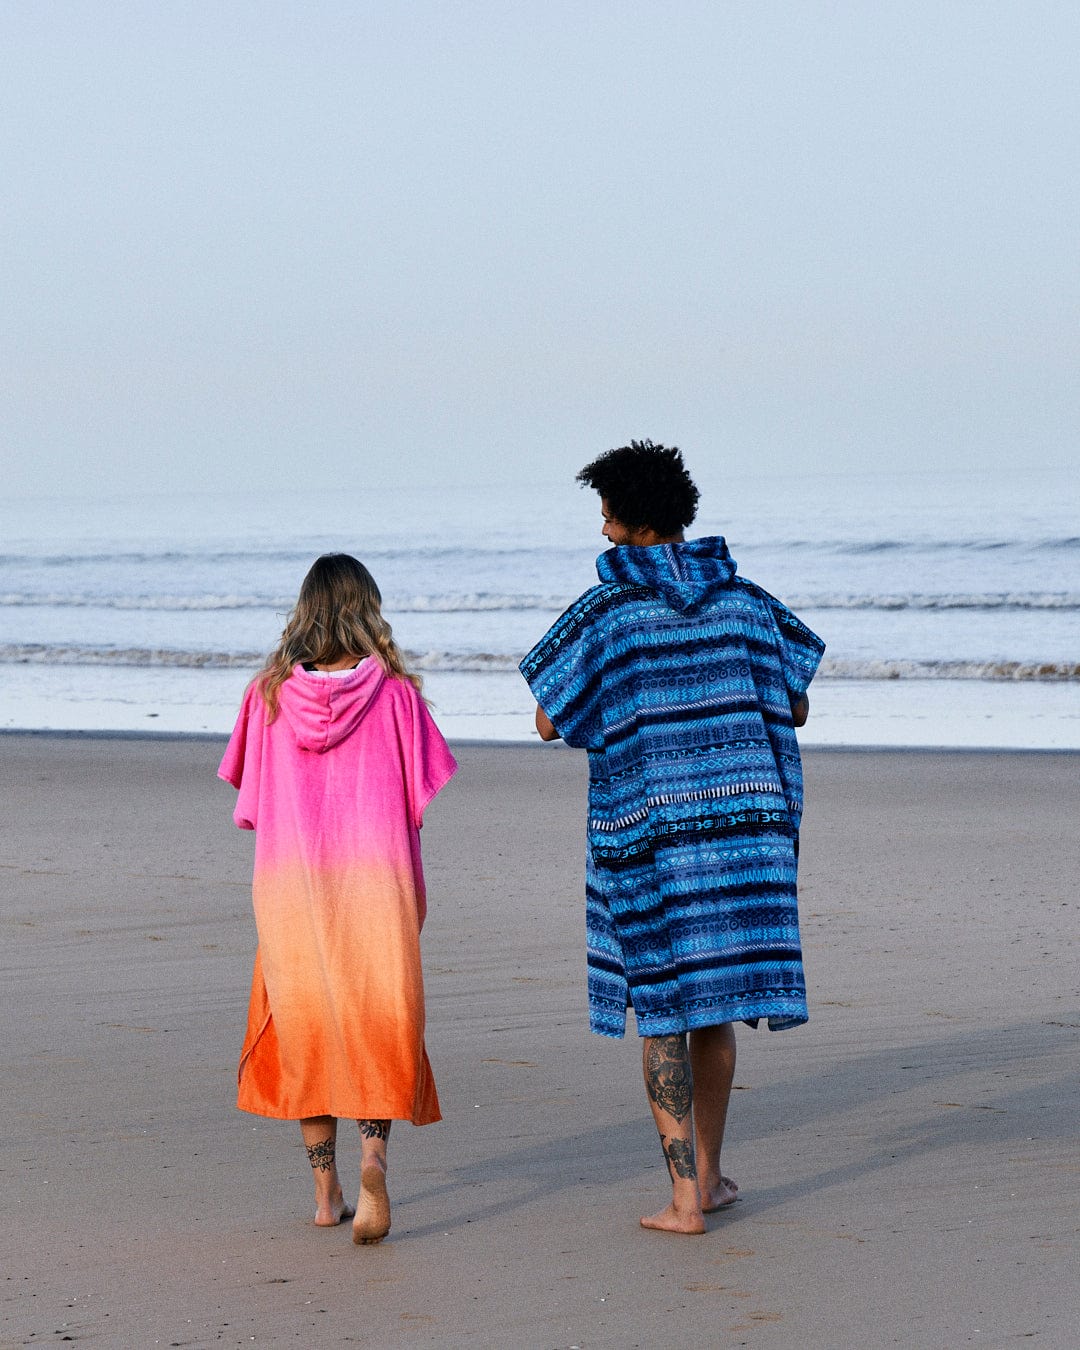 Two people in colorful Saltrock Marks - Changing Towel - Blue towels walking barefoot on a beach, viewed from behind, with the ocean in the background.